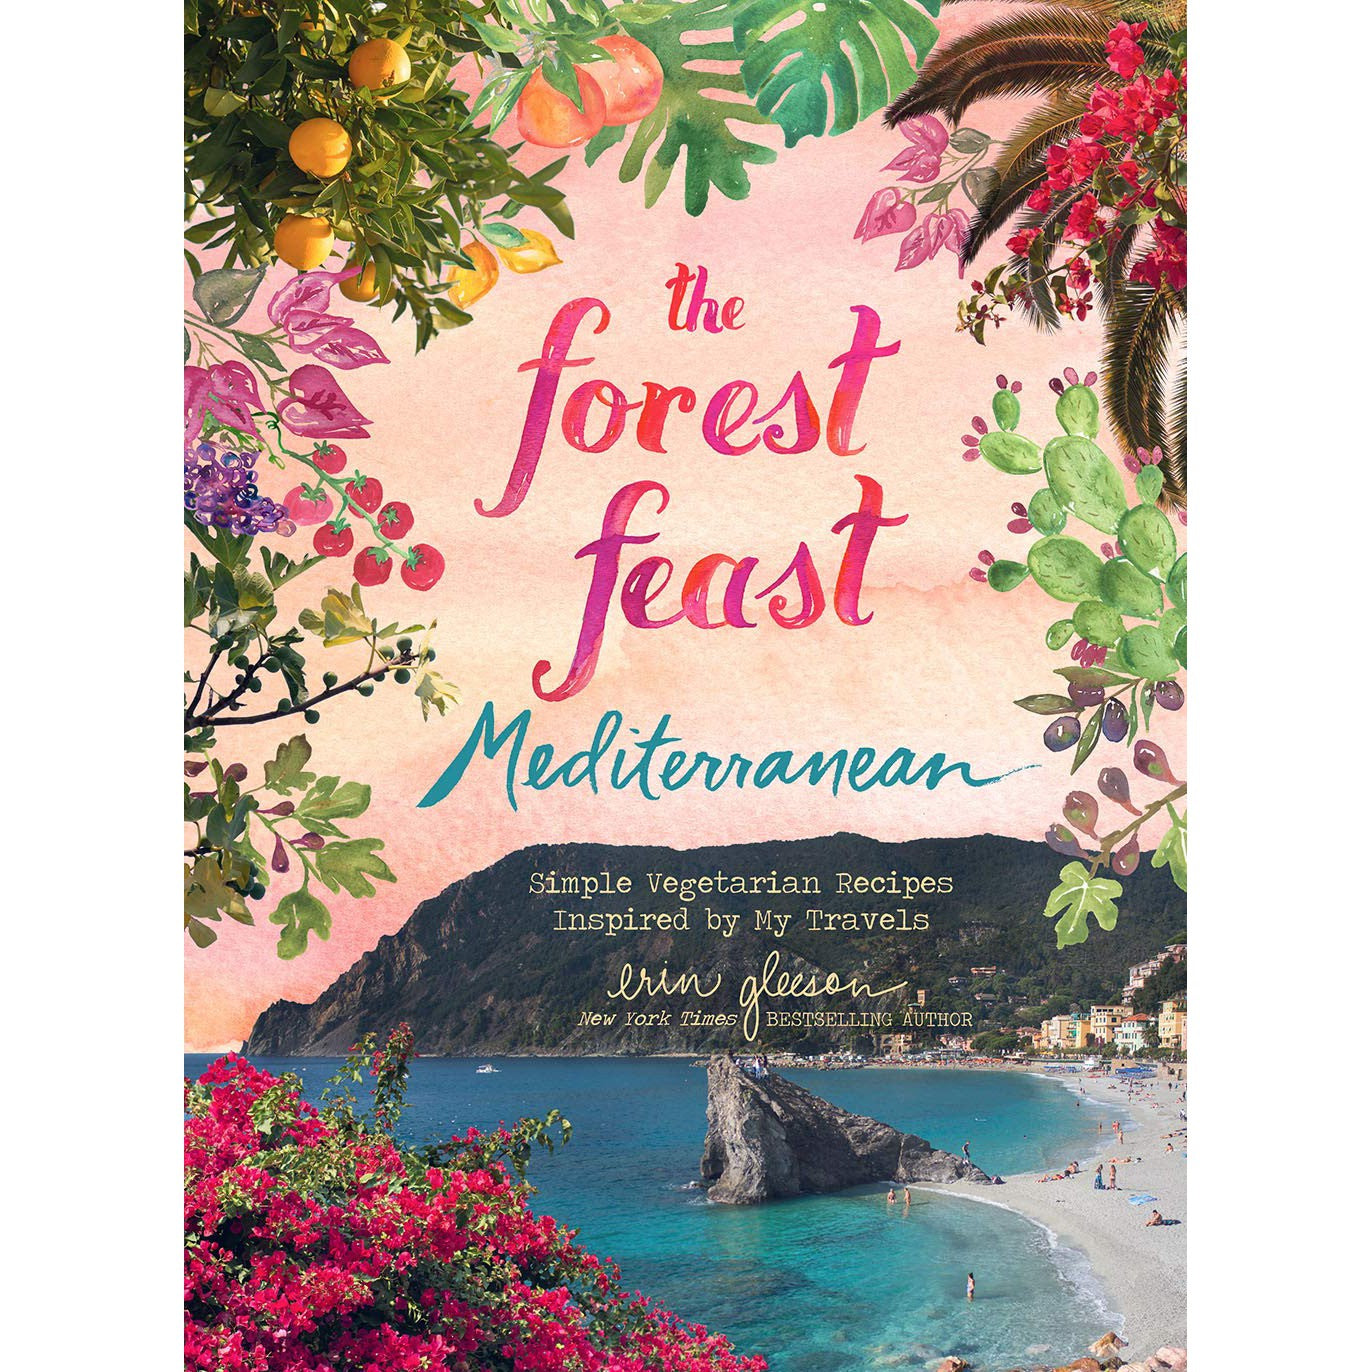 THE FOREST FEAST MEDITERRANEAN: SIMPLE VEGETARIAN RECIPES INSPIRED by MY TRAVELS-Books & Stationery-HACHETTE BOOK GROUP-Coriander